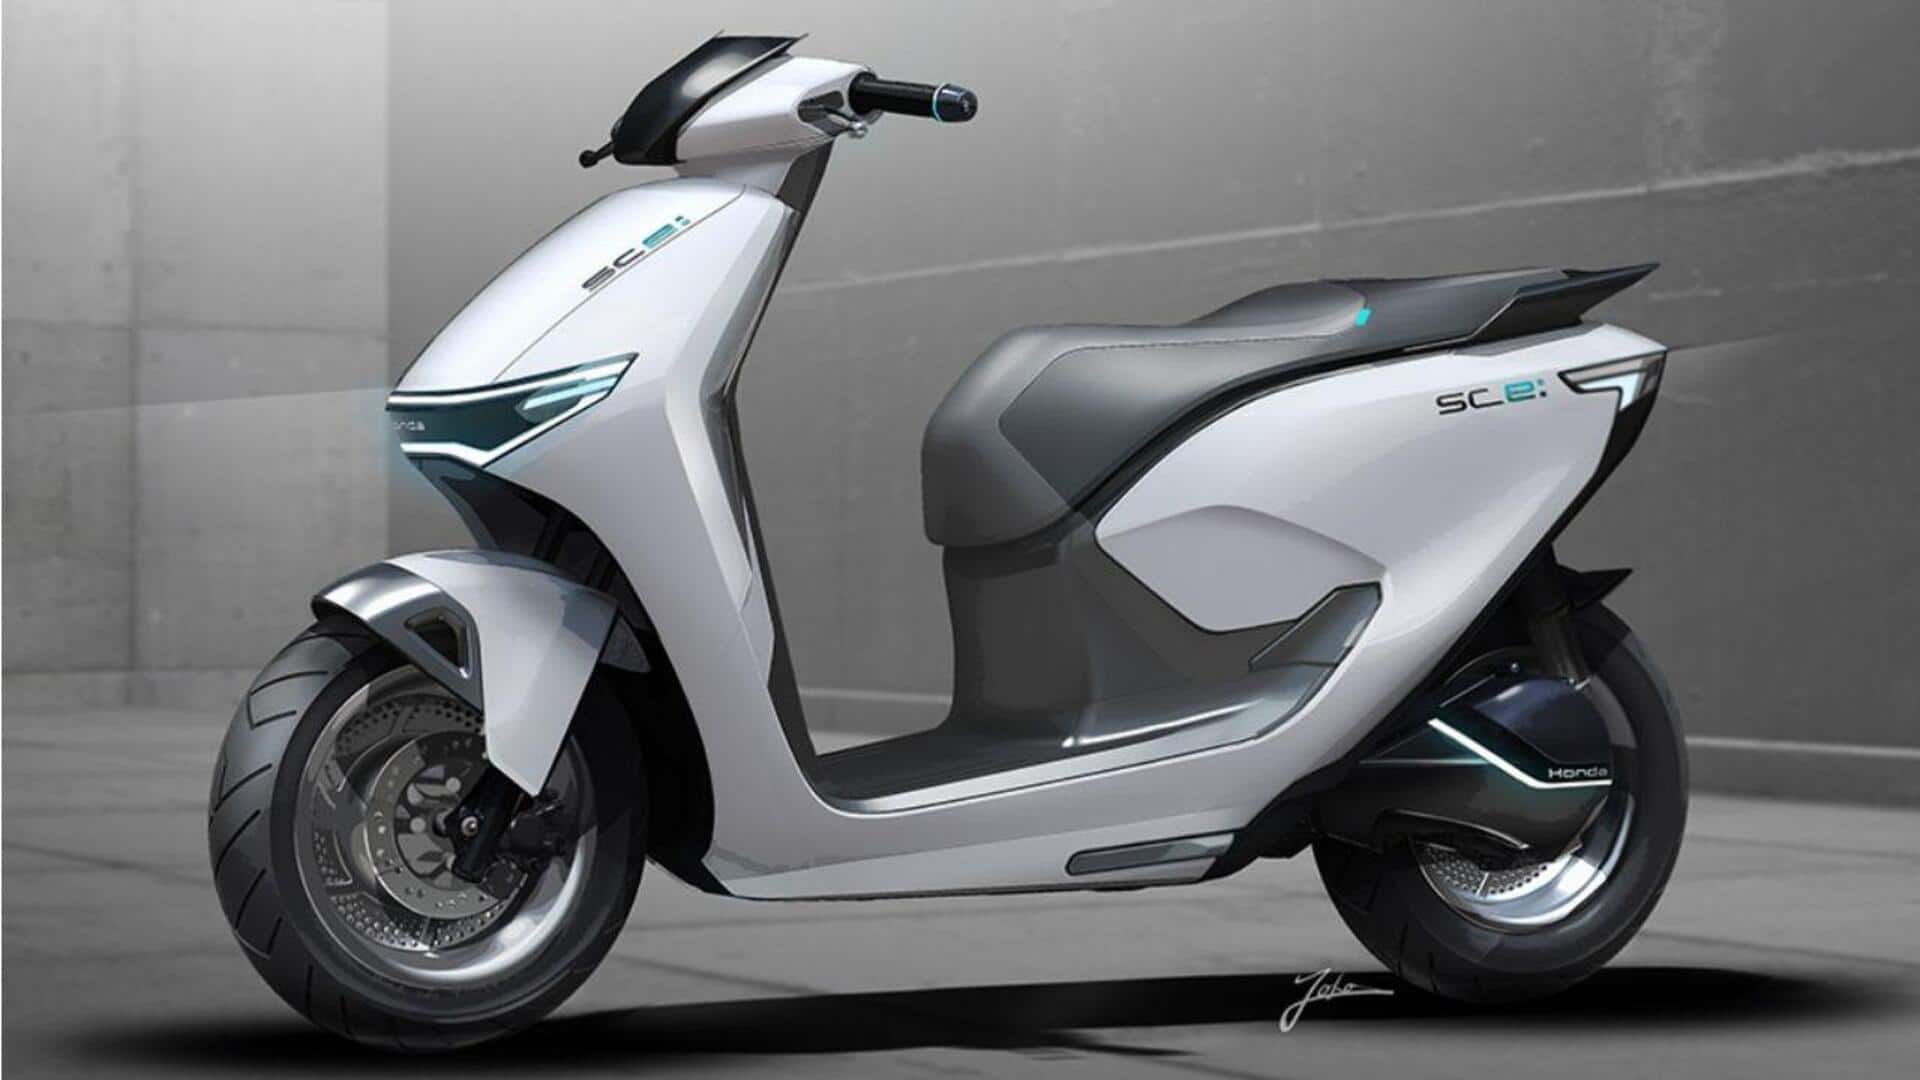 Honda reveals SC e scooter with stylish looks, swappable batteries